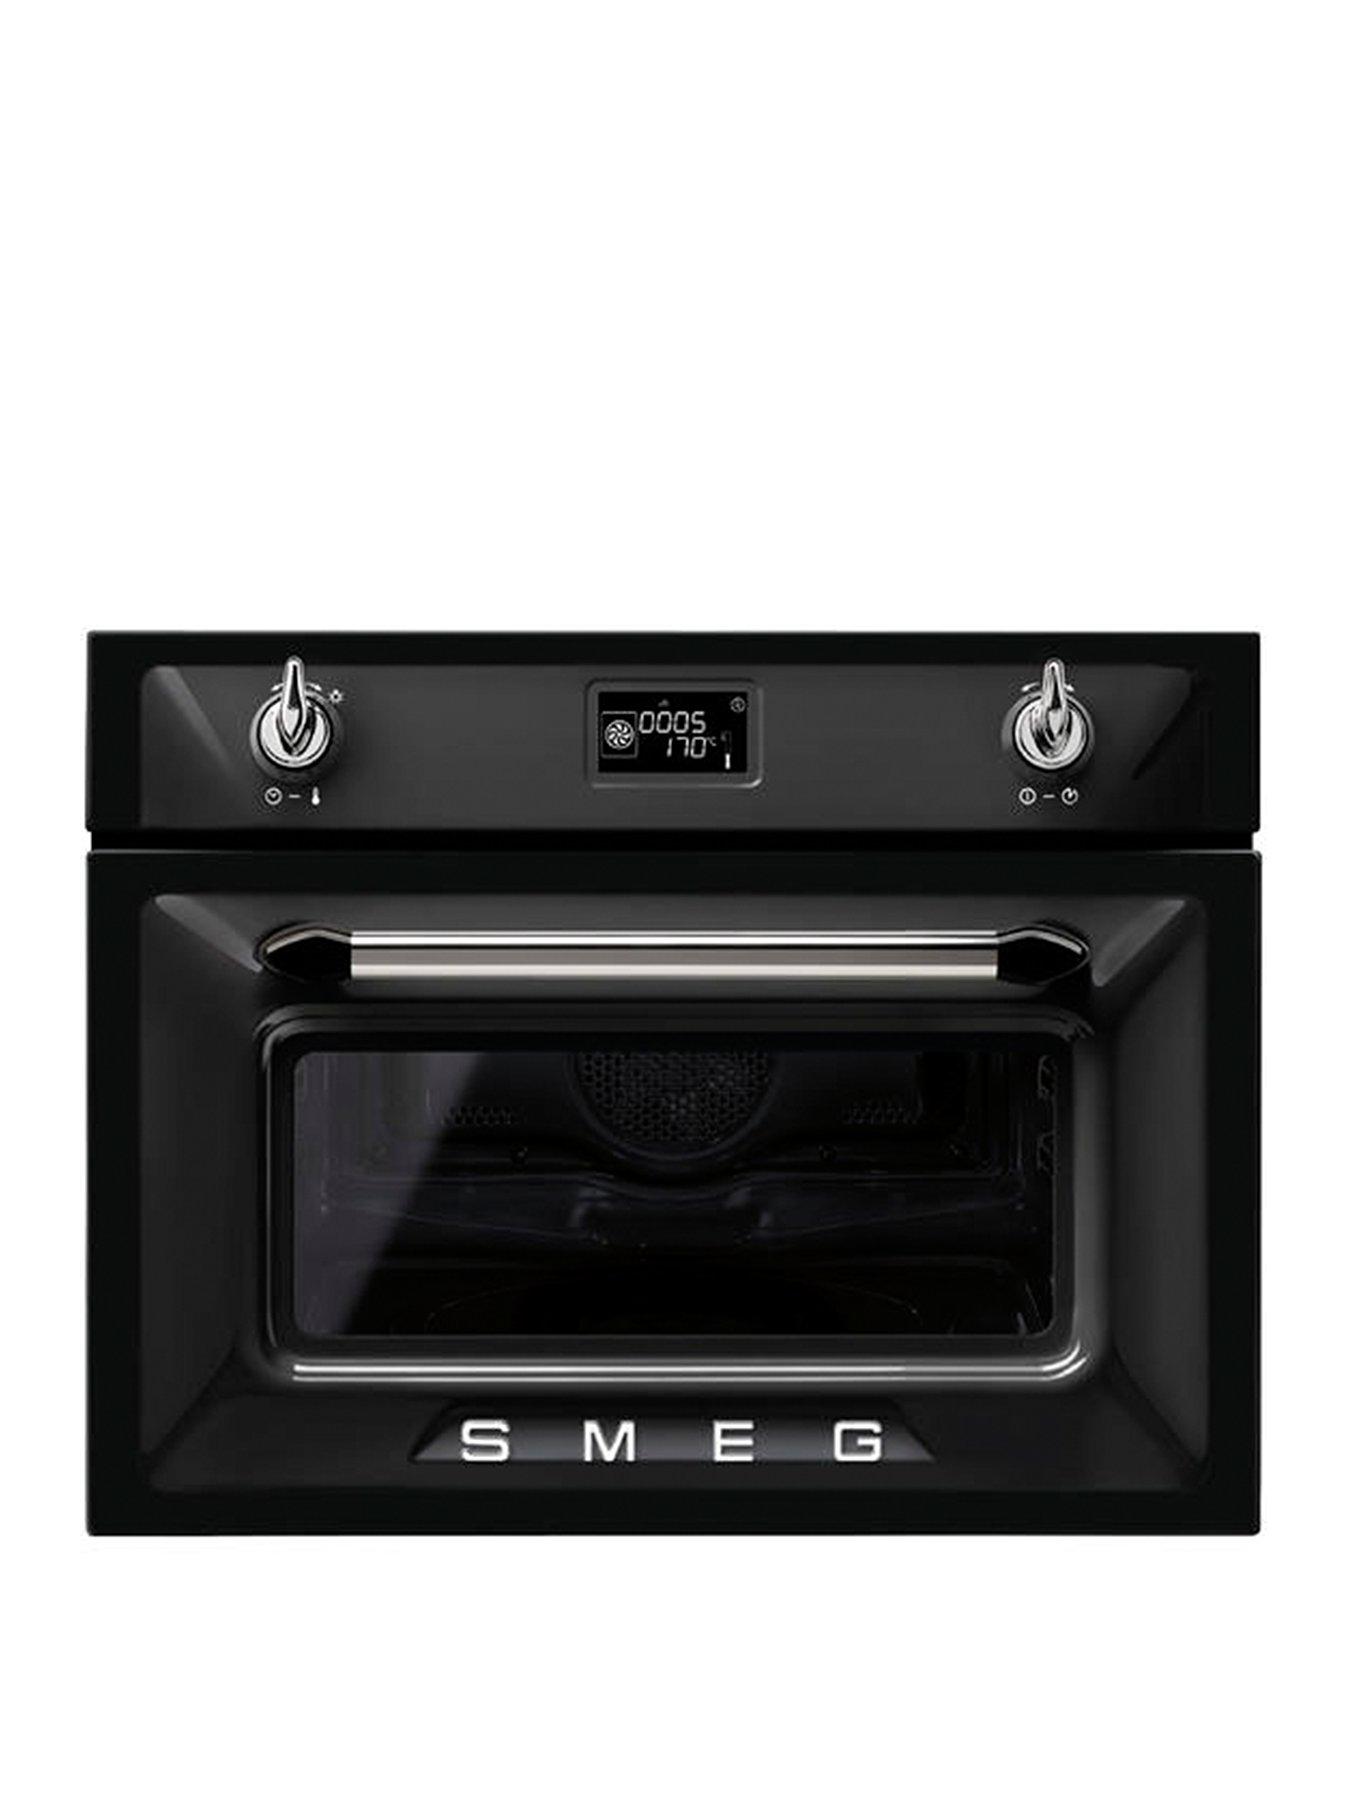 Smeg Sf4920Mcn 45Cm Built-In Compact Combination Microwave Oven – Black